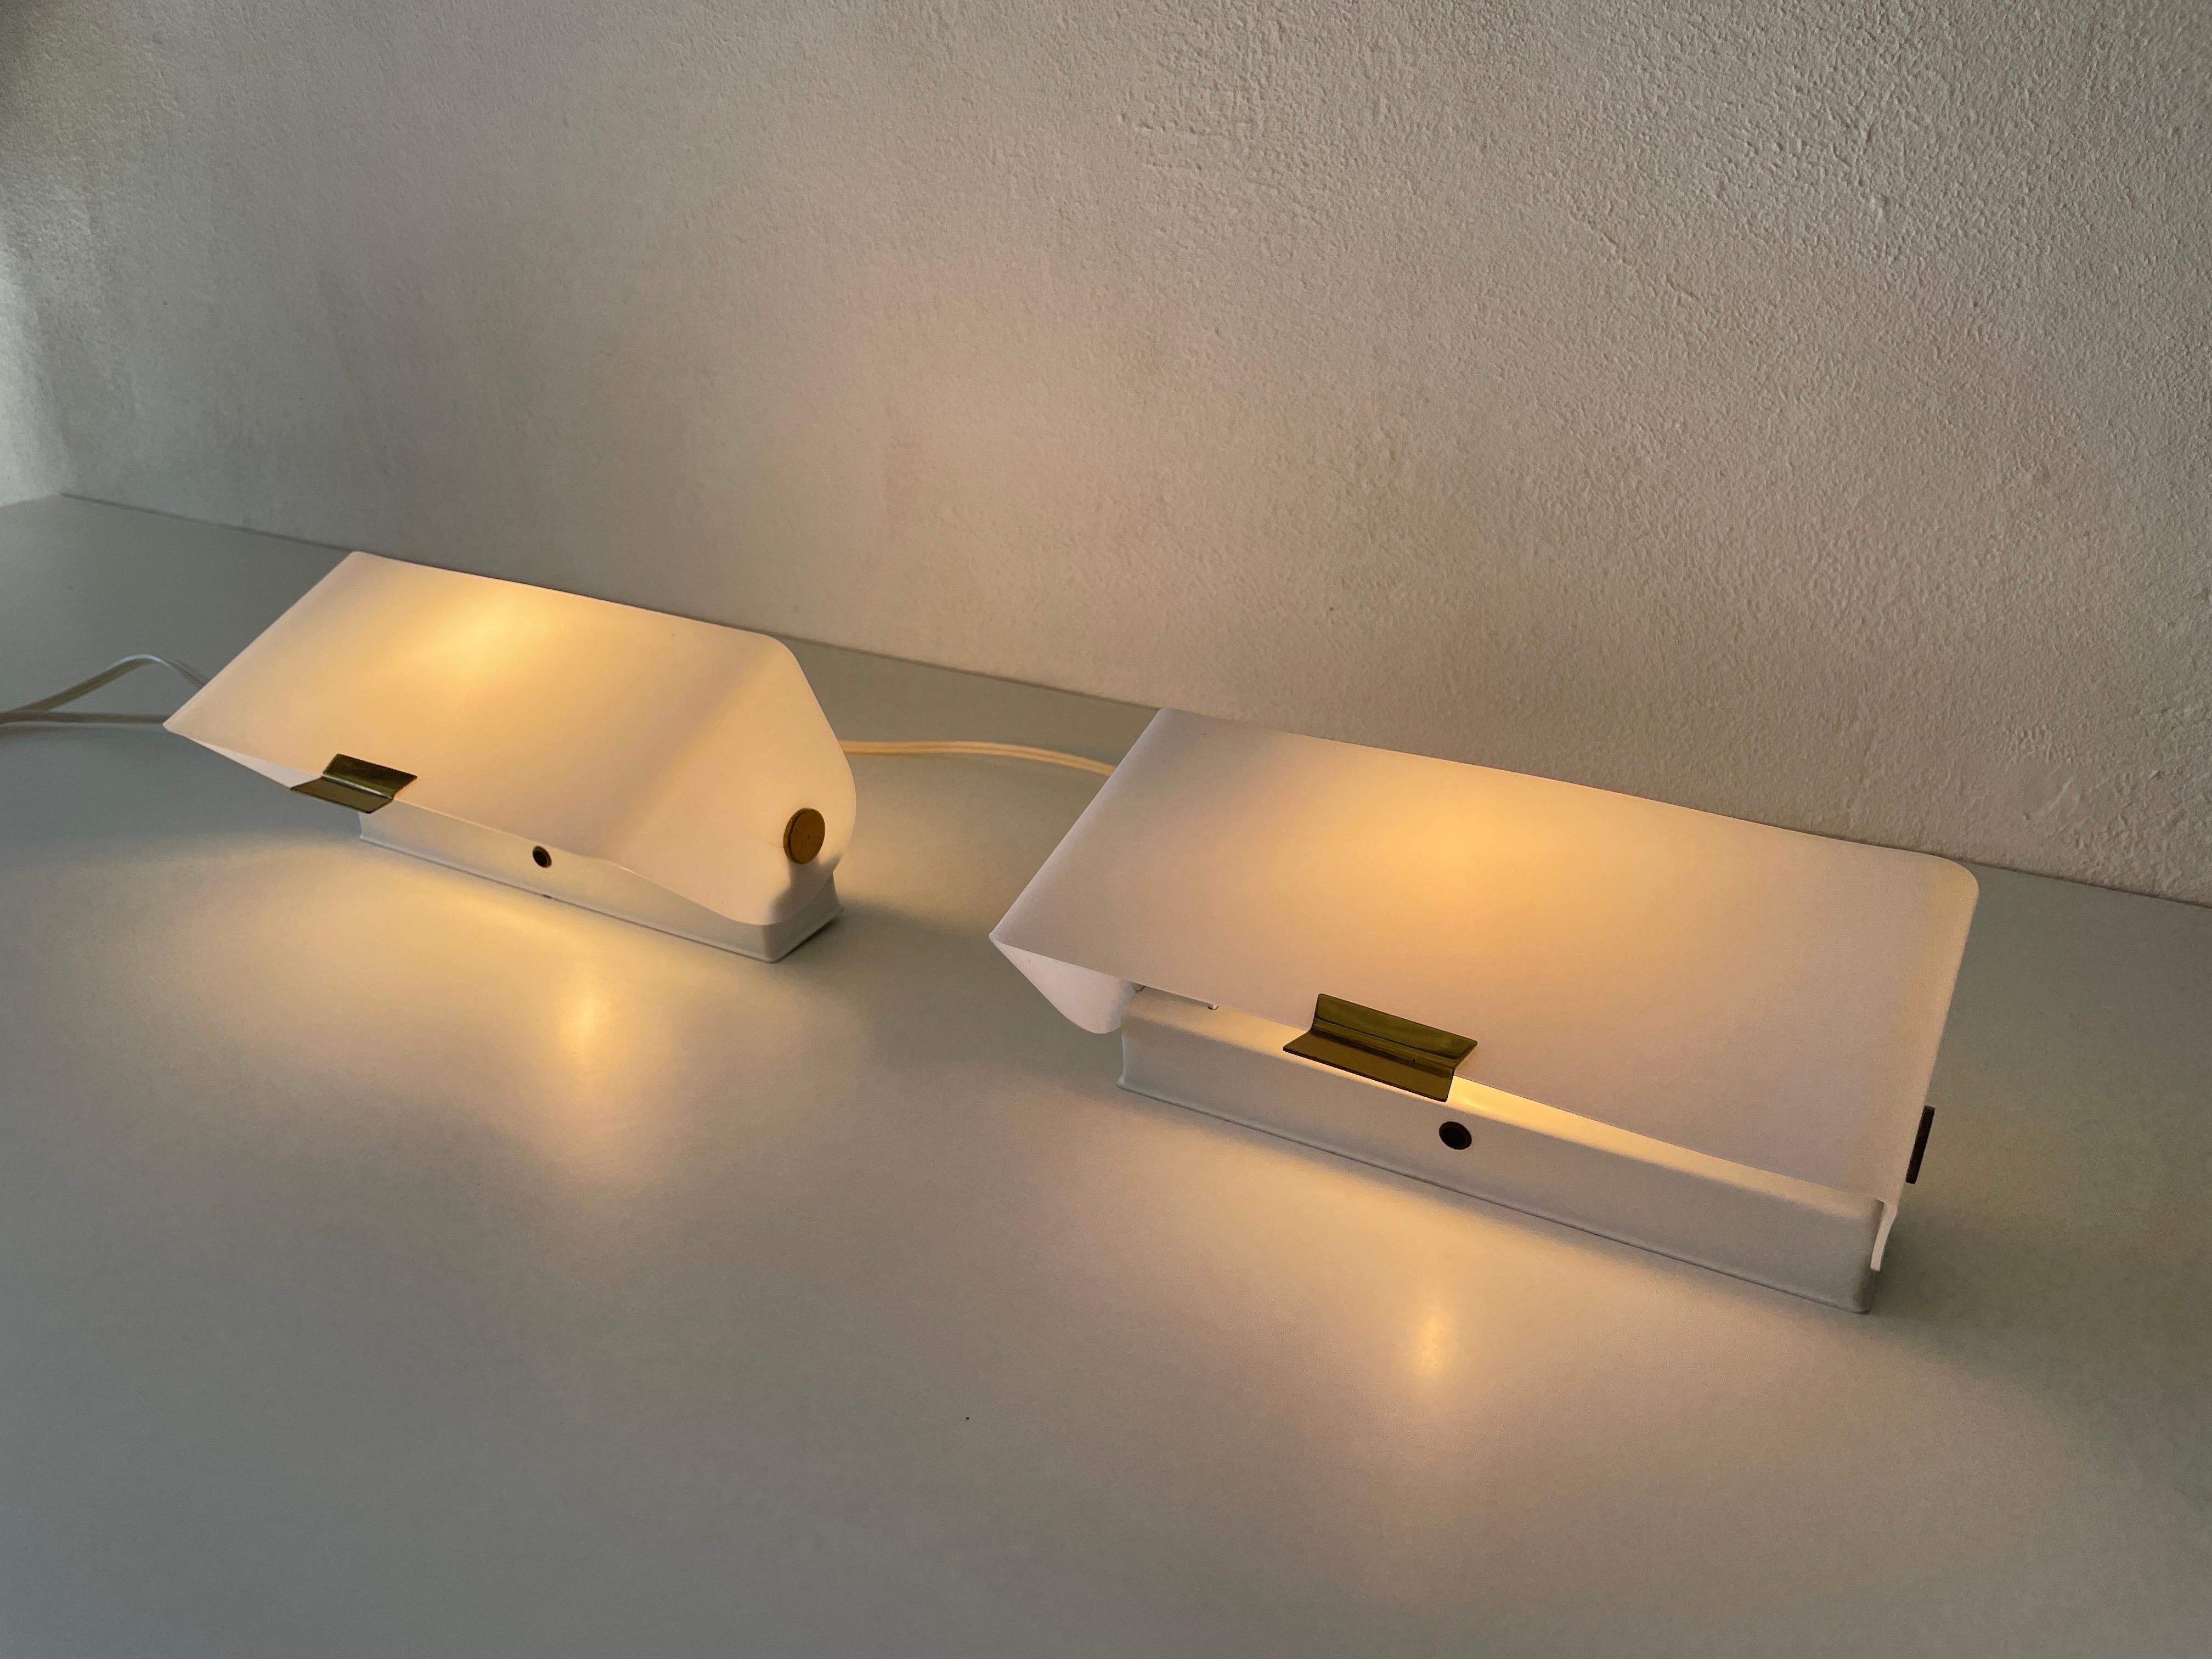 White Plexiglass Adjustable Shade Pair of Sconces, 1950s, Germany For Sale 7